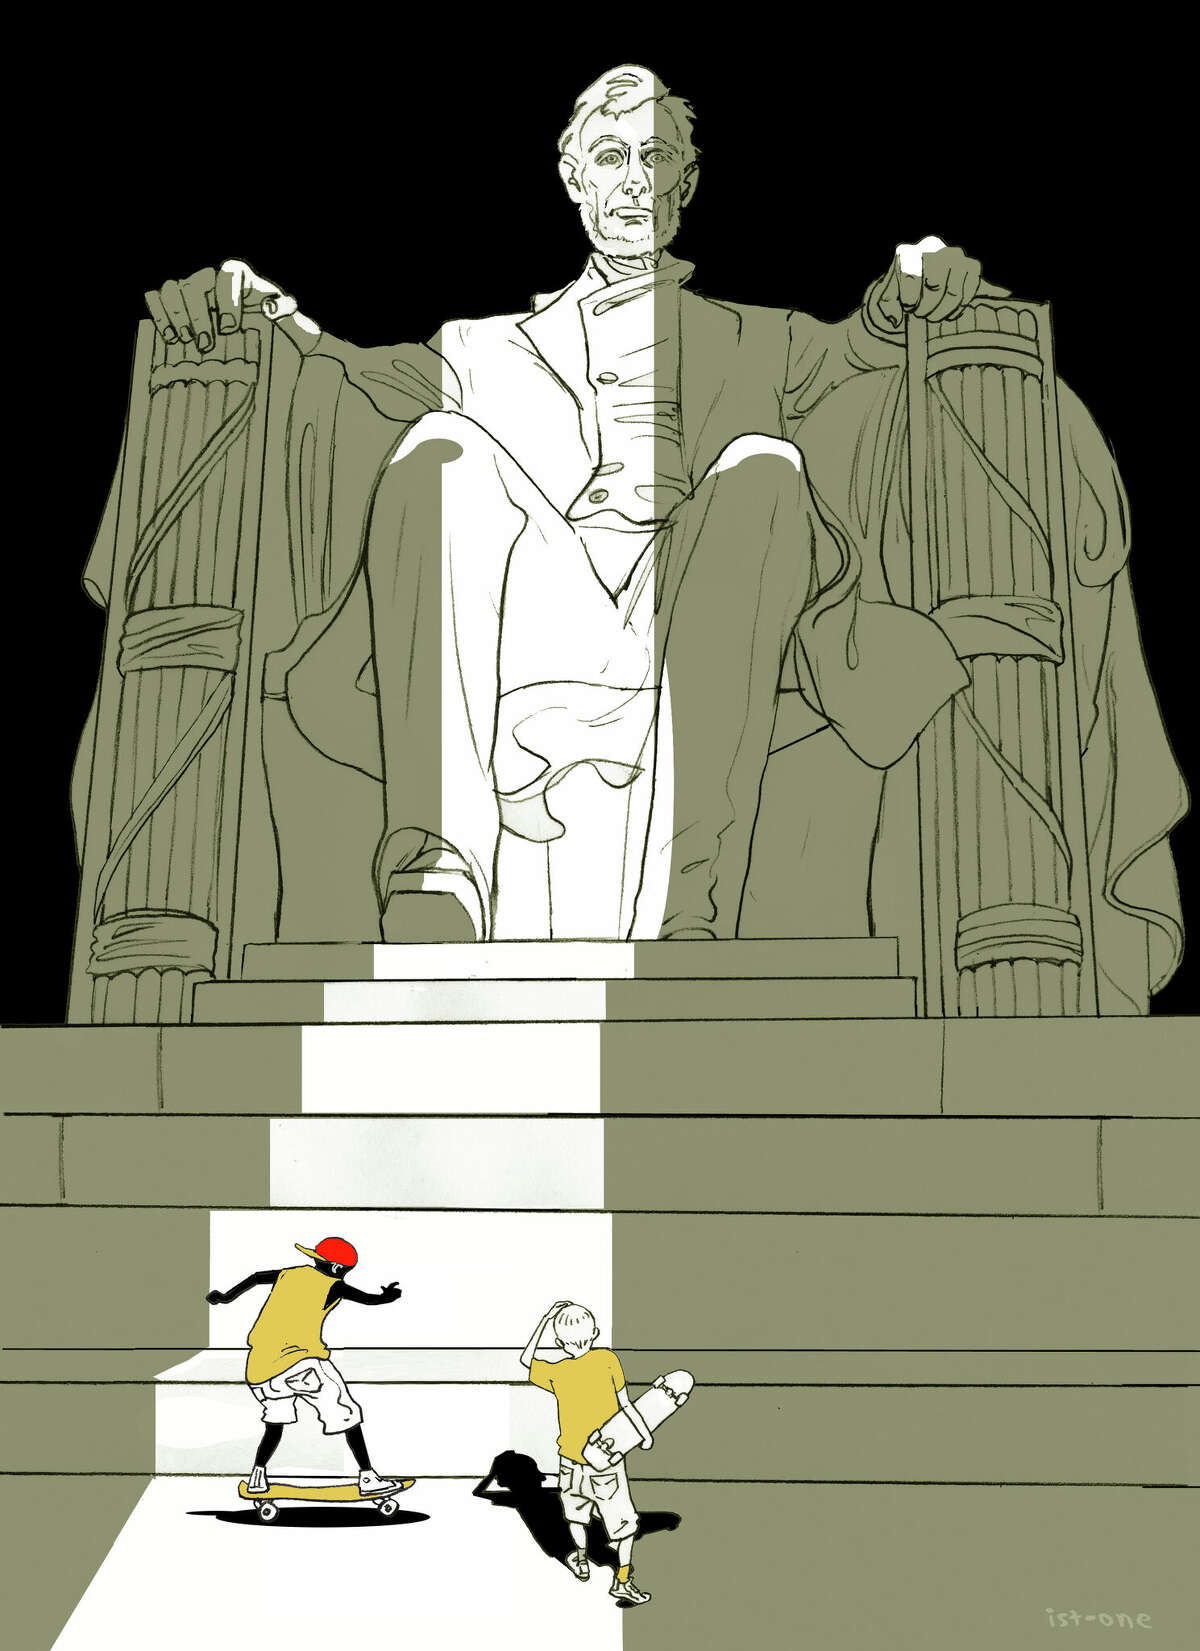 IstvanBanyaiSet in Stone,2008Illustration forSet in Stone: Abraham Lincoln and the Politics of Memoryby Thomas Mallon,The New Yorker, October 13, 2008DigitalImage©Istvan Banyai. All rights reserved